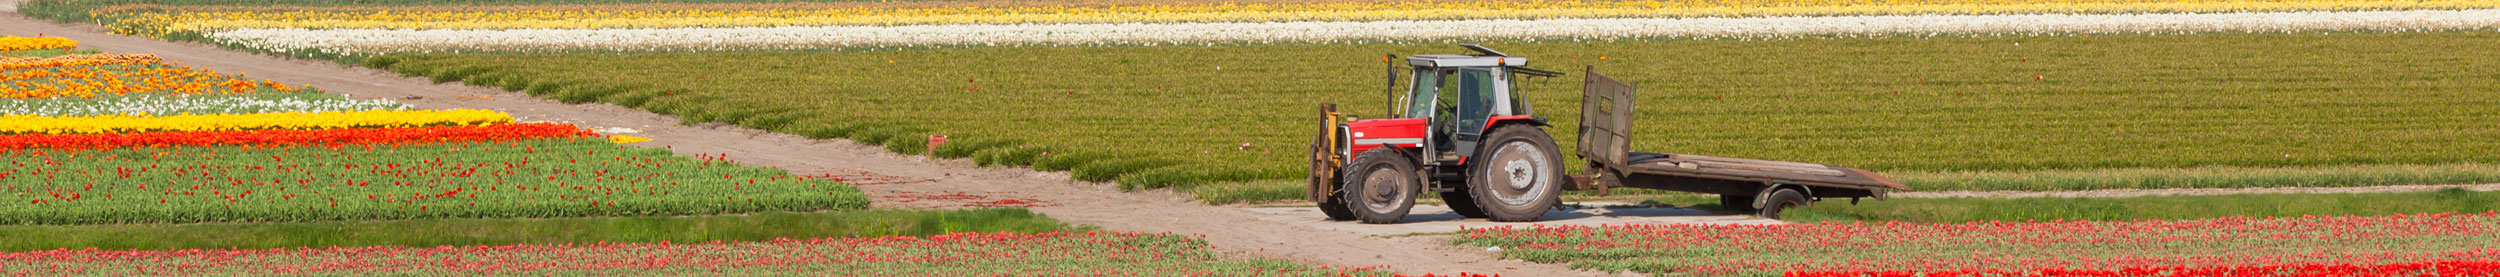 red tracktor in field